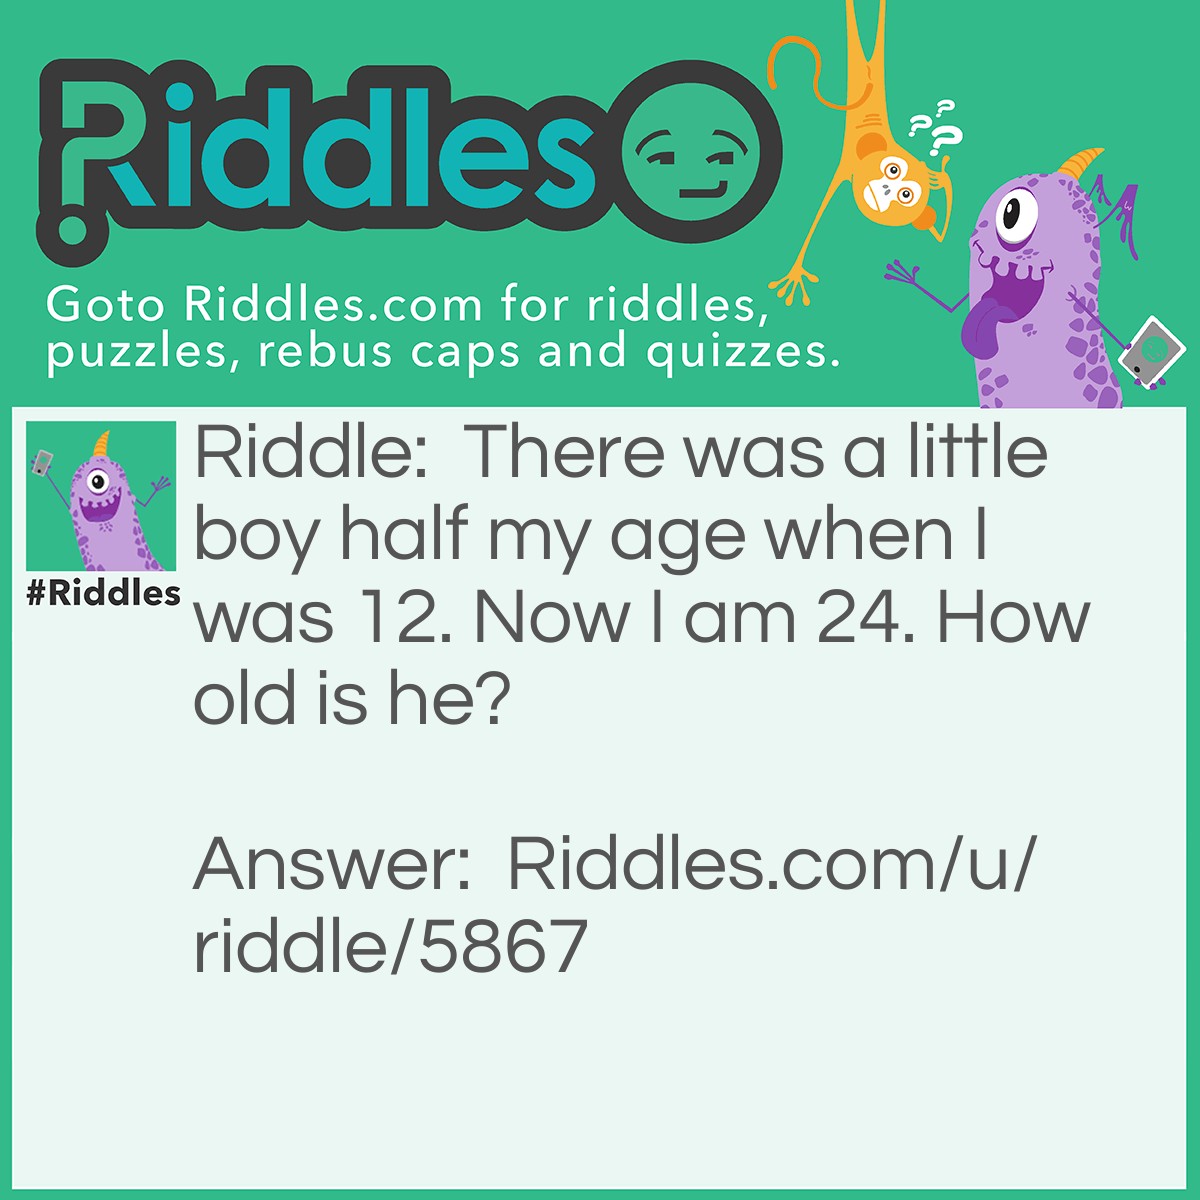 Riddle: There was a little boy half my age when I was 12. Now I am 24. How old is he? Answer: He is 6 years younger then me, so 18 years old.